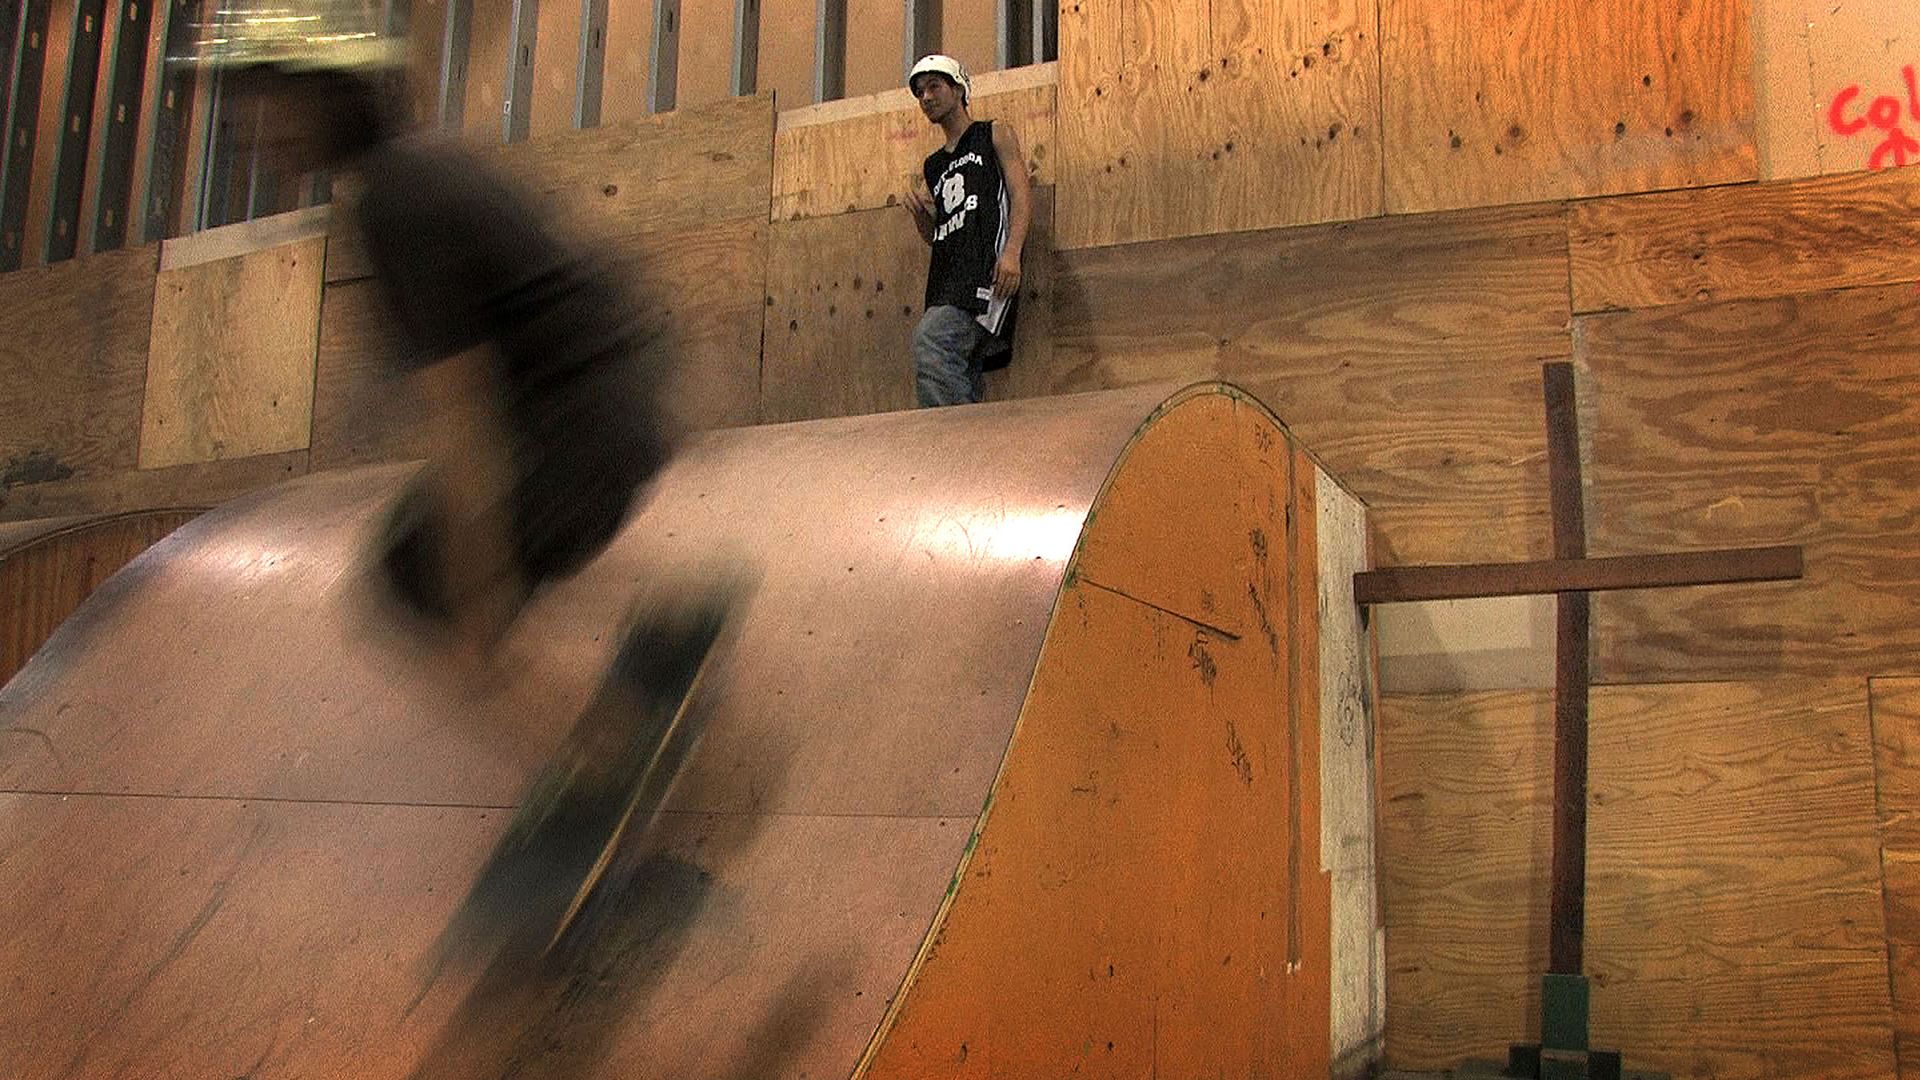 Skaters go down a wooden halfpipe 